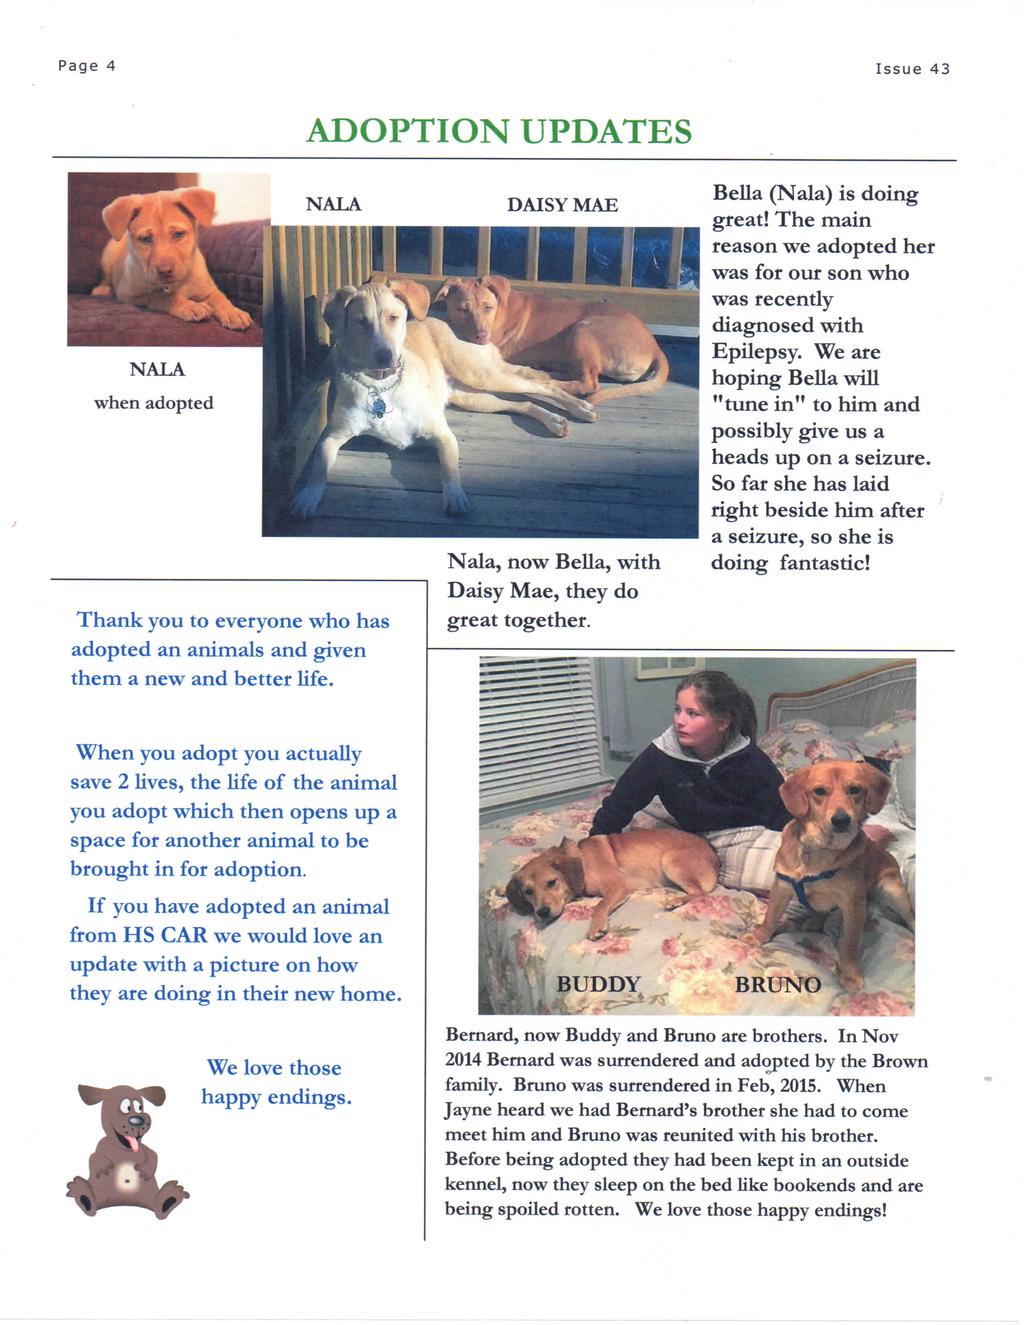 Page 4 Issue 43 ADOPTION UPDATES NALA when adopted Thank you to everyone who has adopted an animals and given them a new and better Ufe.